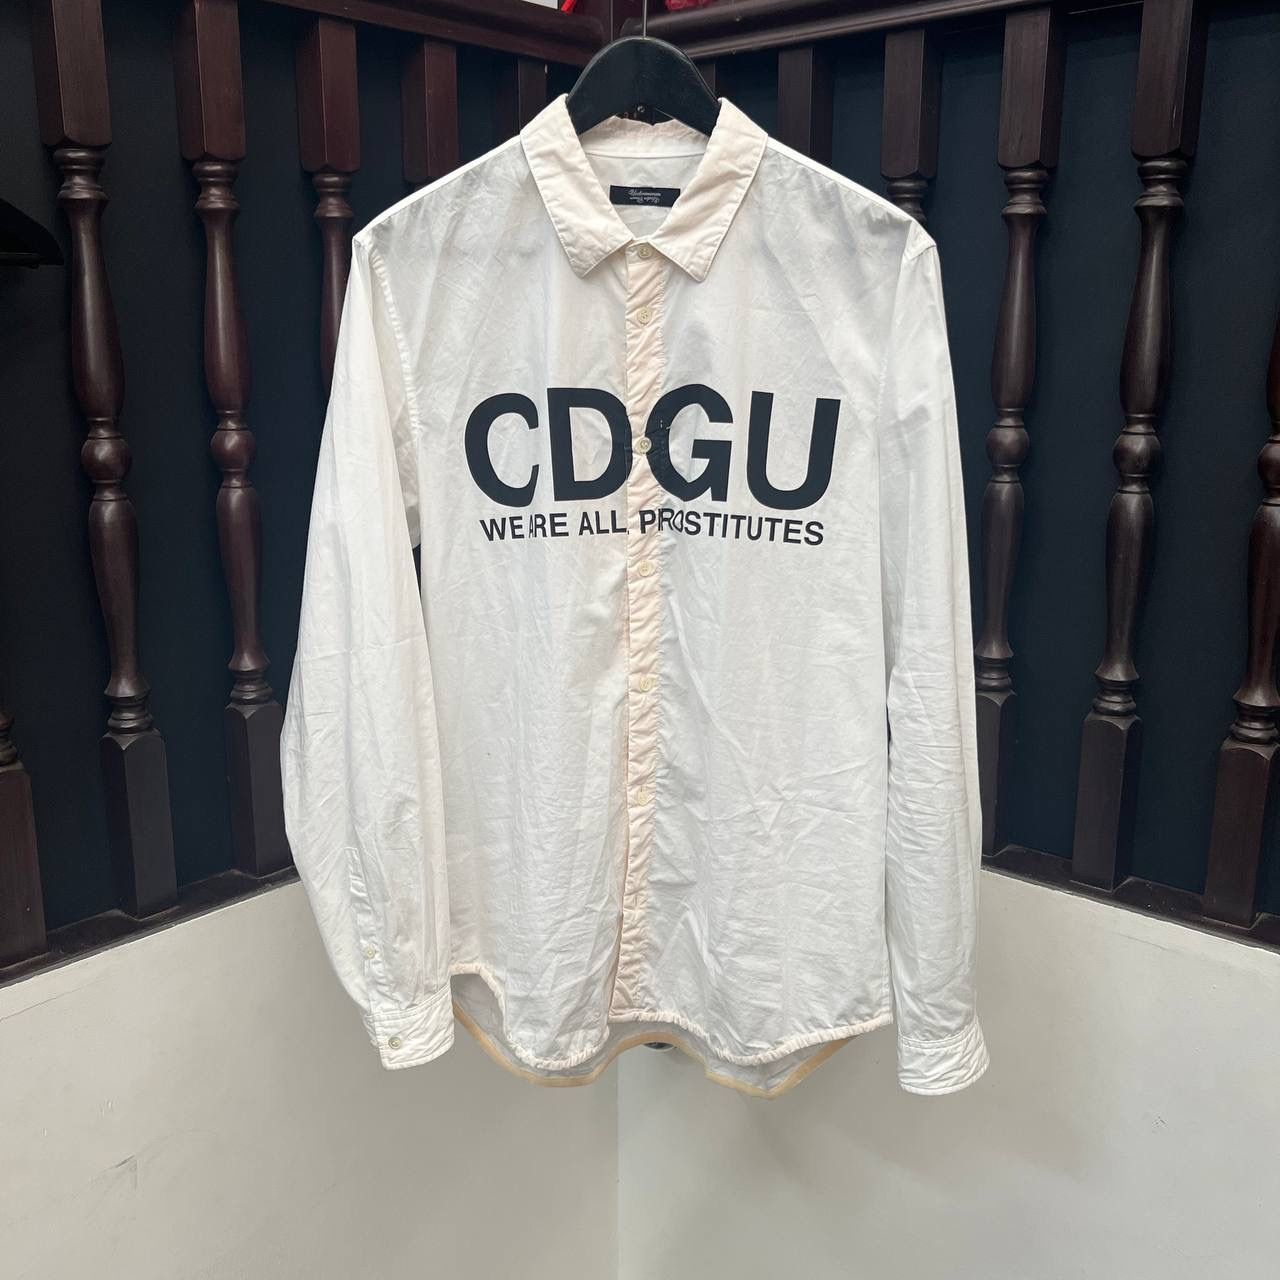 Undercover CDGU “WE ARE ALL PROSTITUTES” Long Sleeve Shirt Size US L / EU 52-54 / 3 - 1 Preview